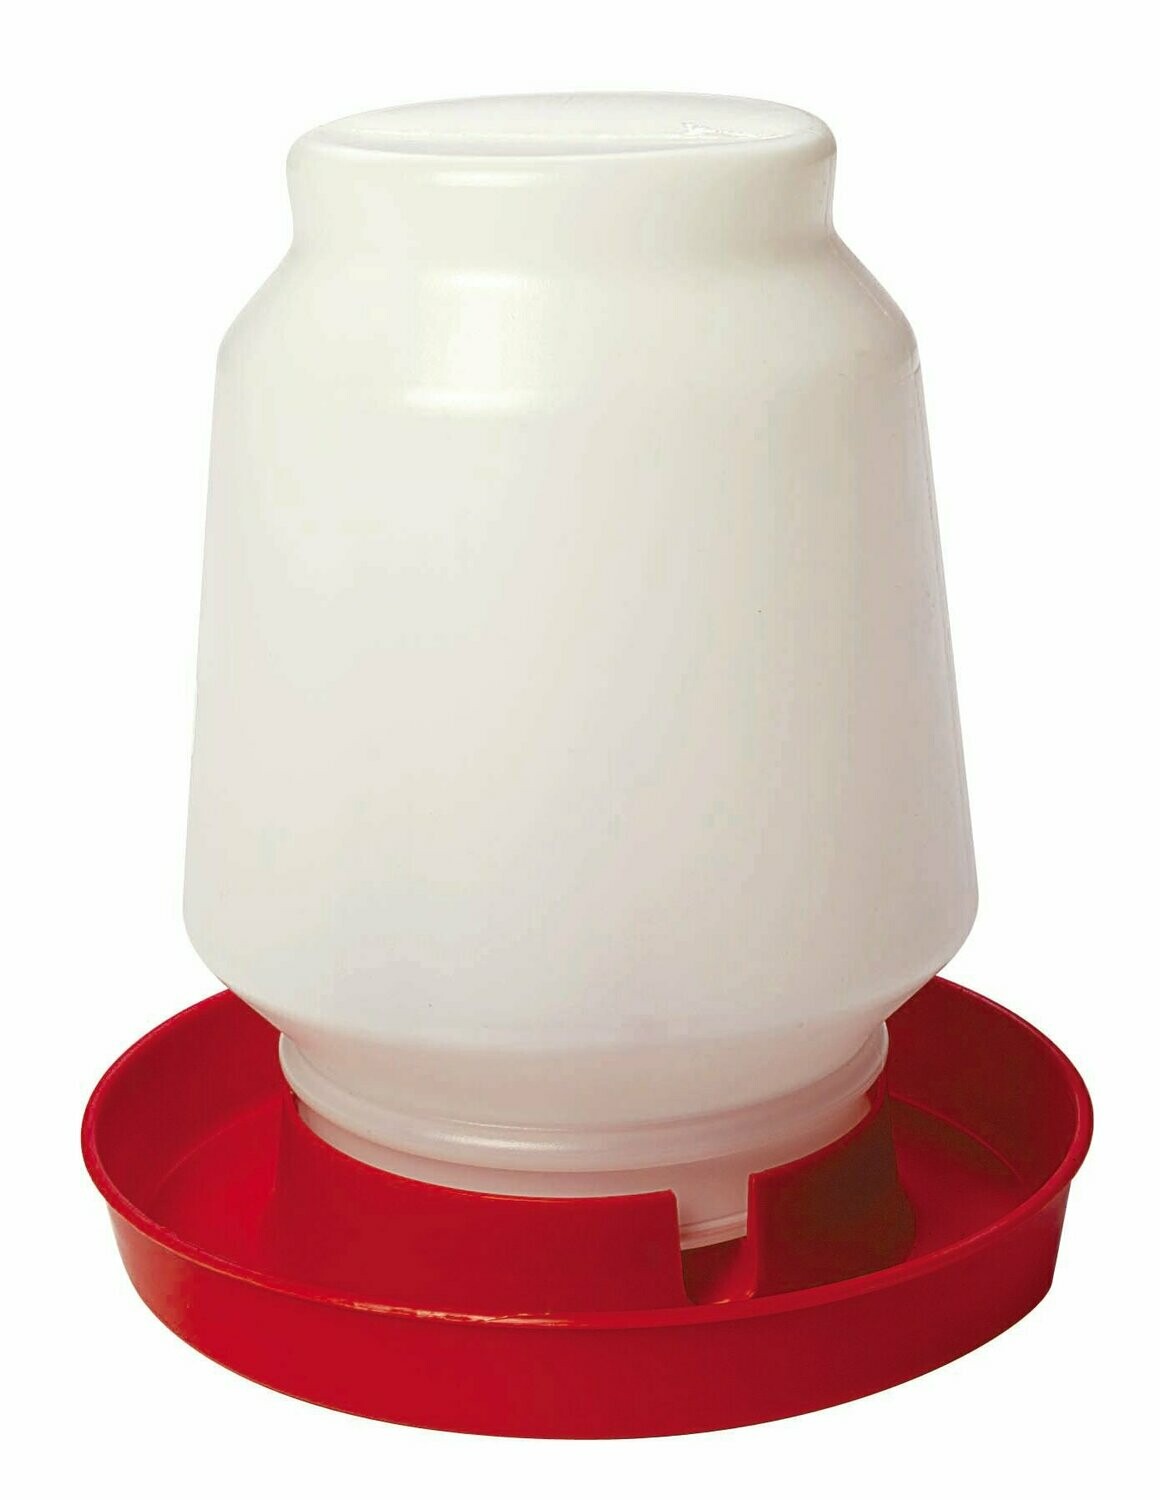 1 Gallon Poultry waterer.  Complete both pieces